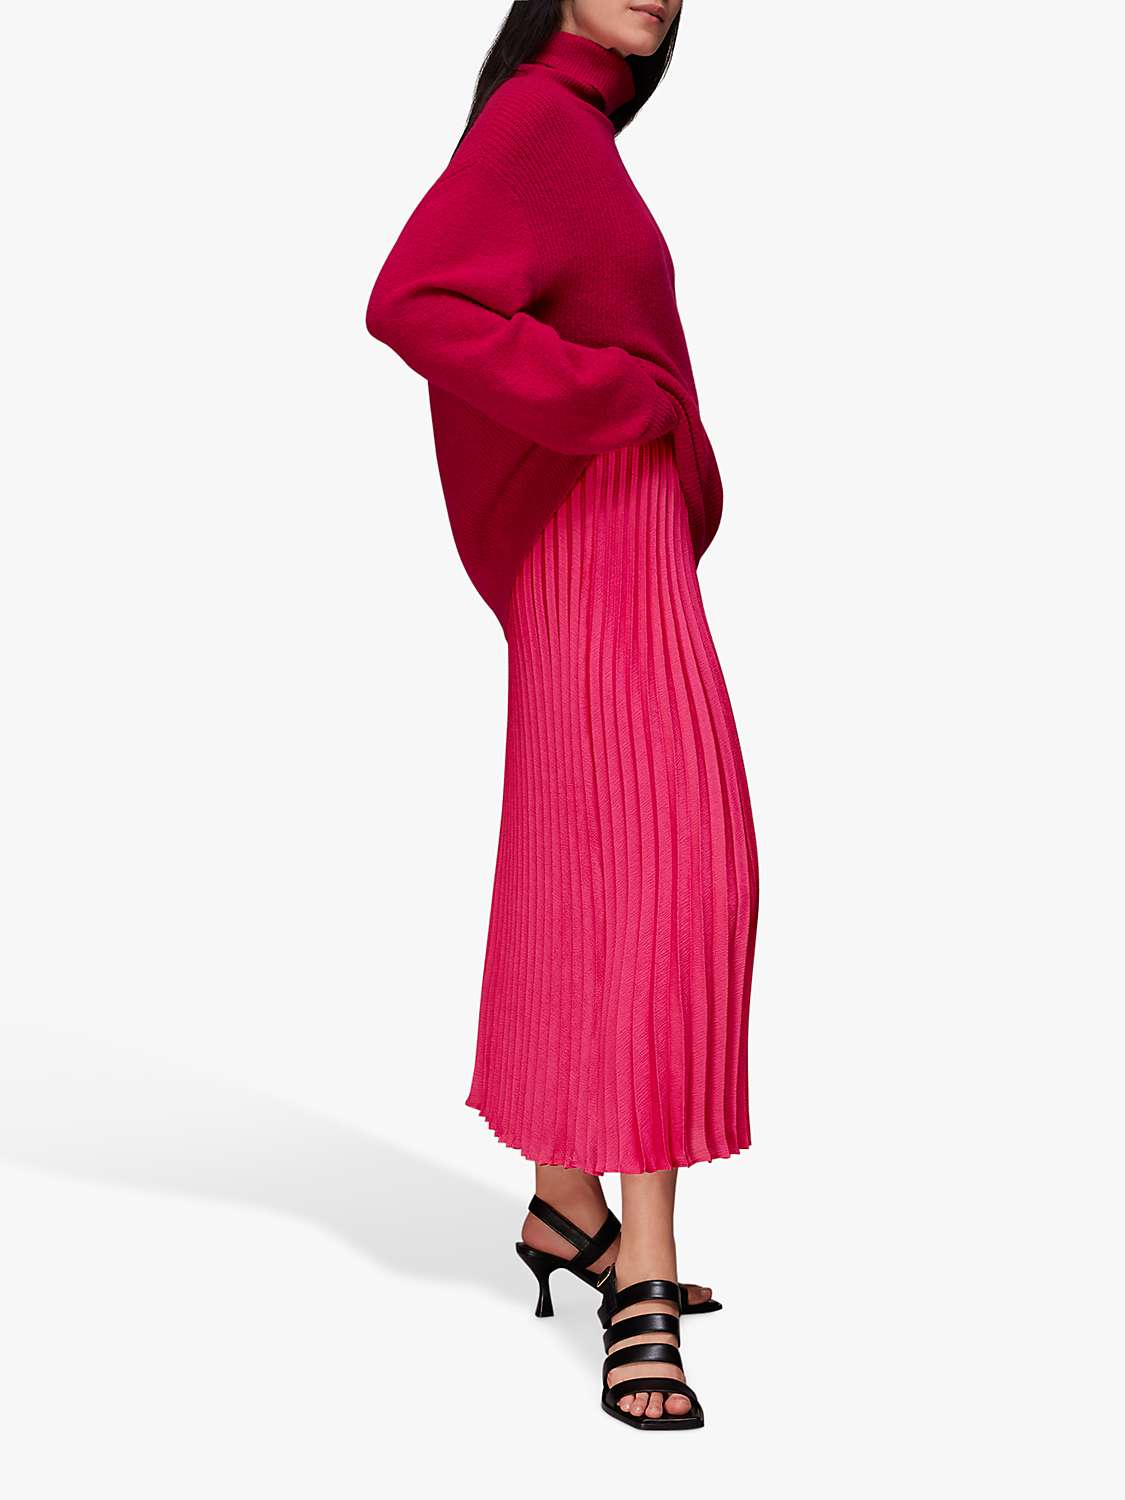 Whistles Katie Pleated Skirt, Pink at John Lewis & Partners